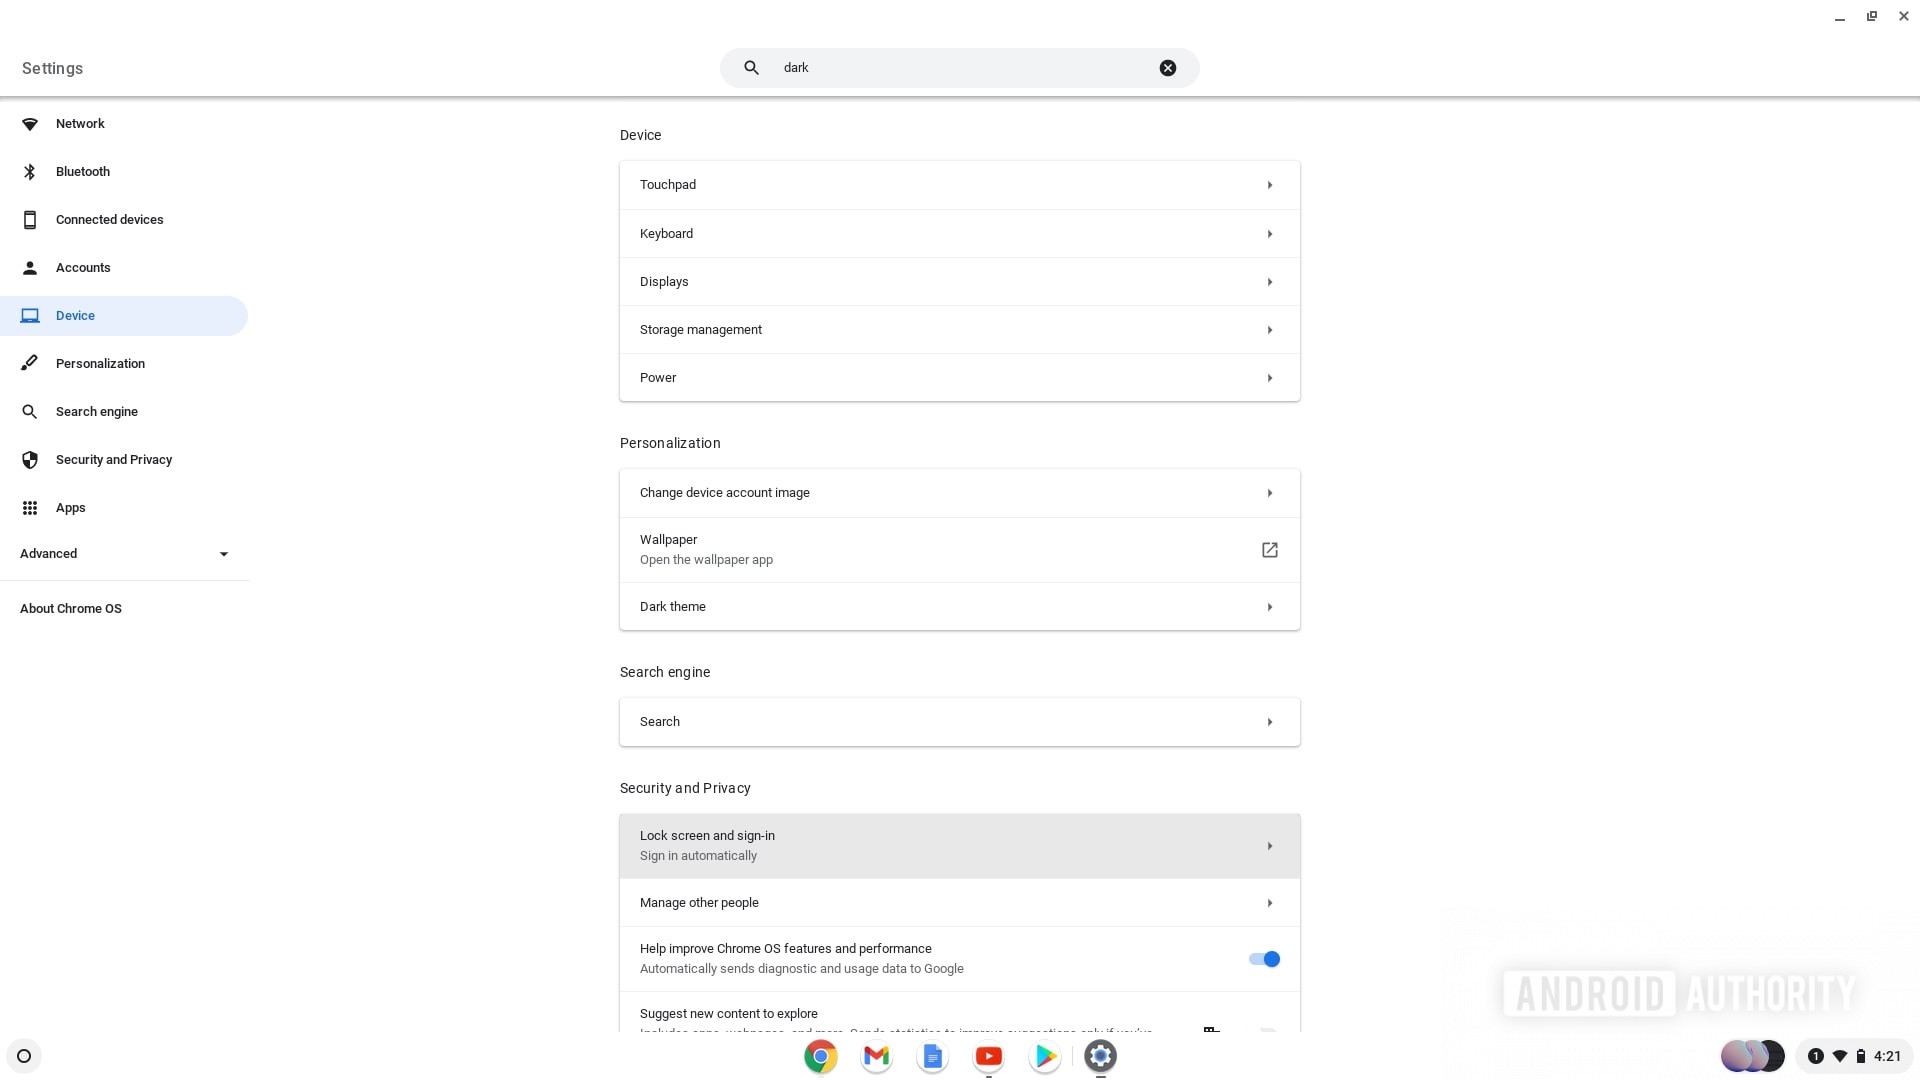 Your Chromebook displays the settings